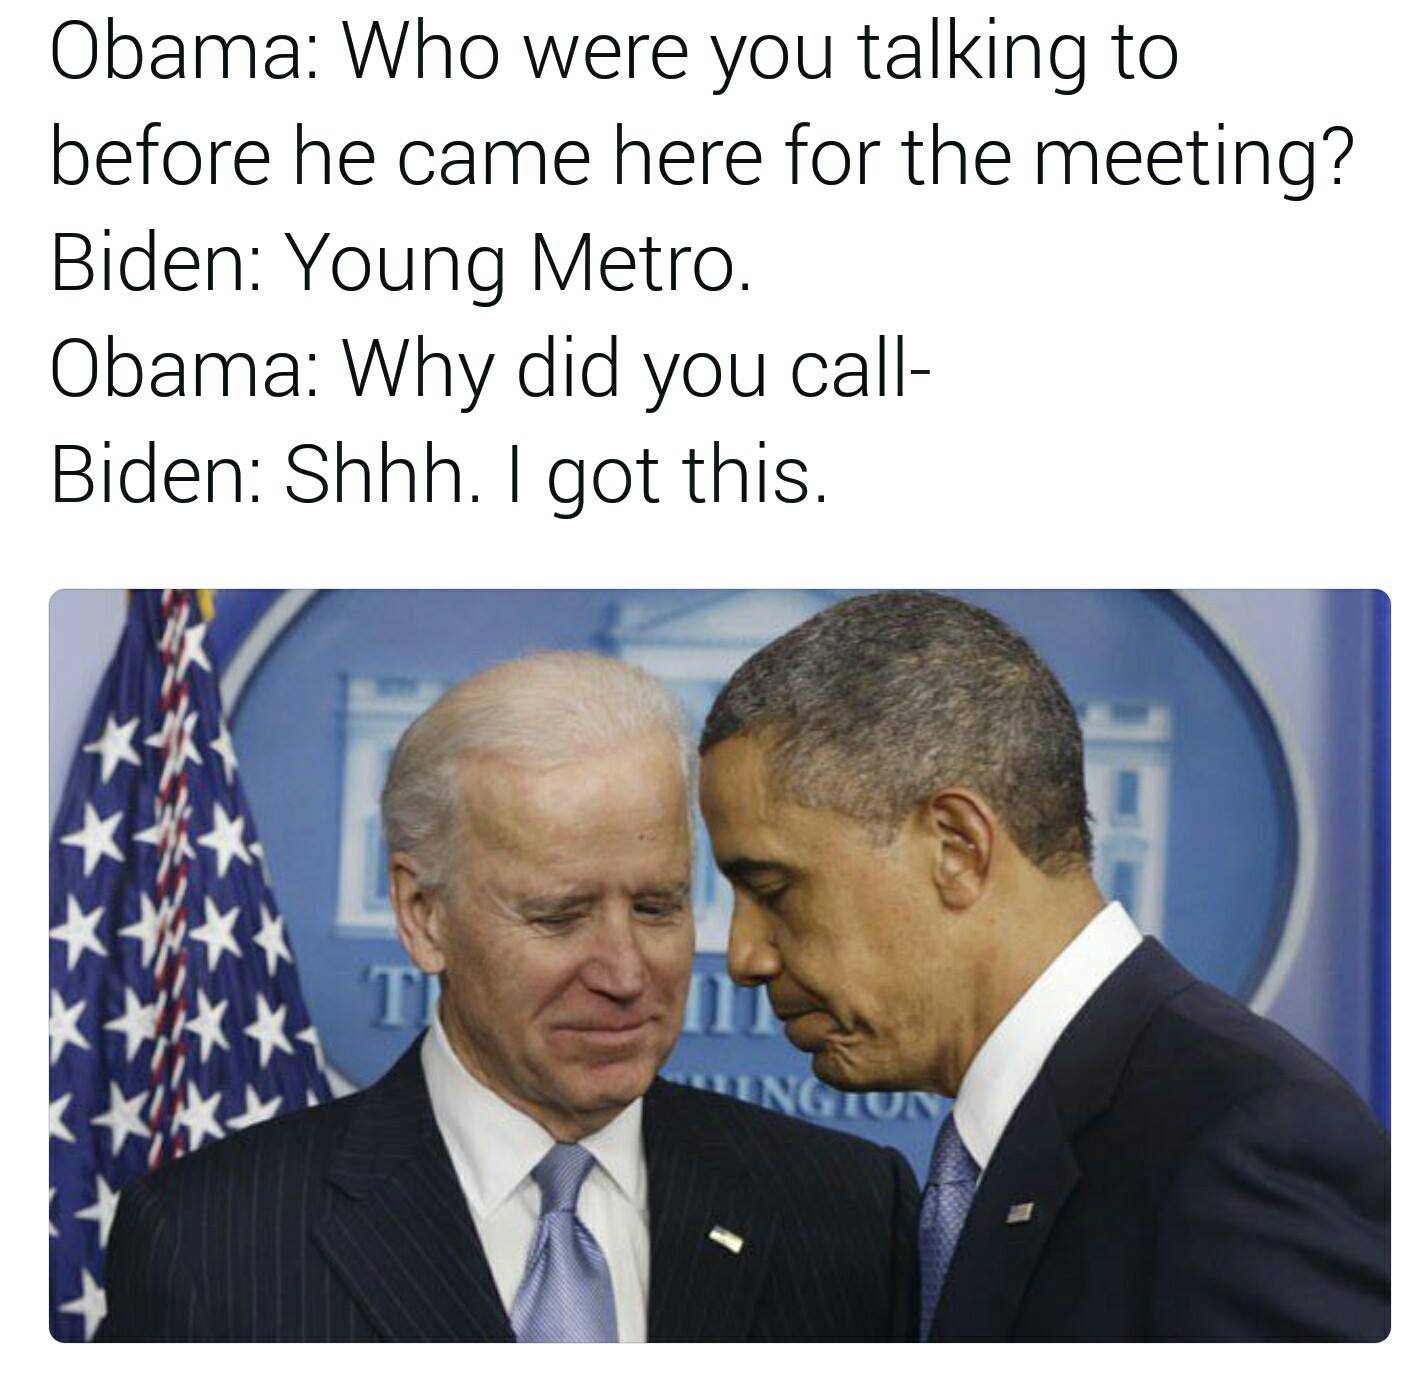 biden memes meeting - Obama Who were you talking to before he came here for the meeting? Biden Young Metro. Obama Why did you call Biden Shhh. I got this. Tingiun